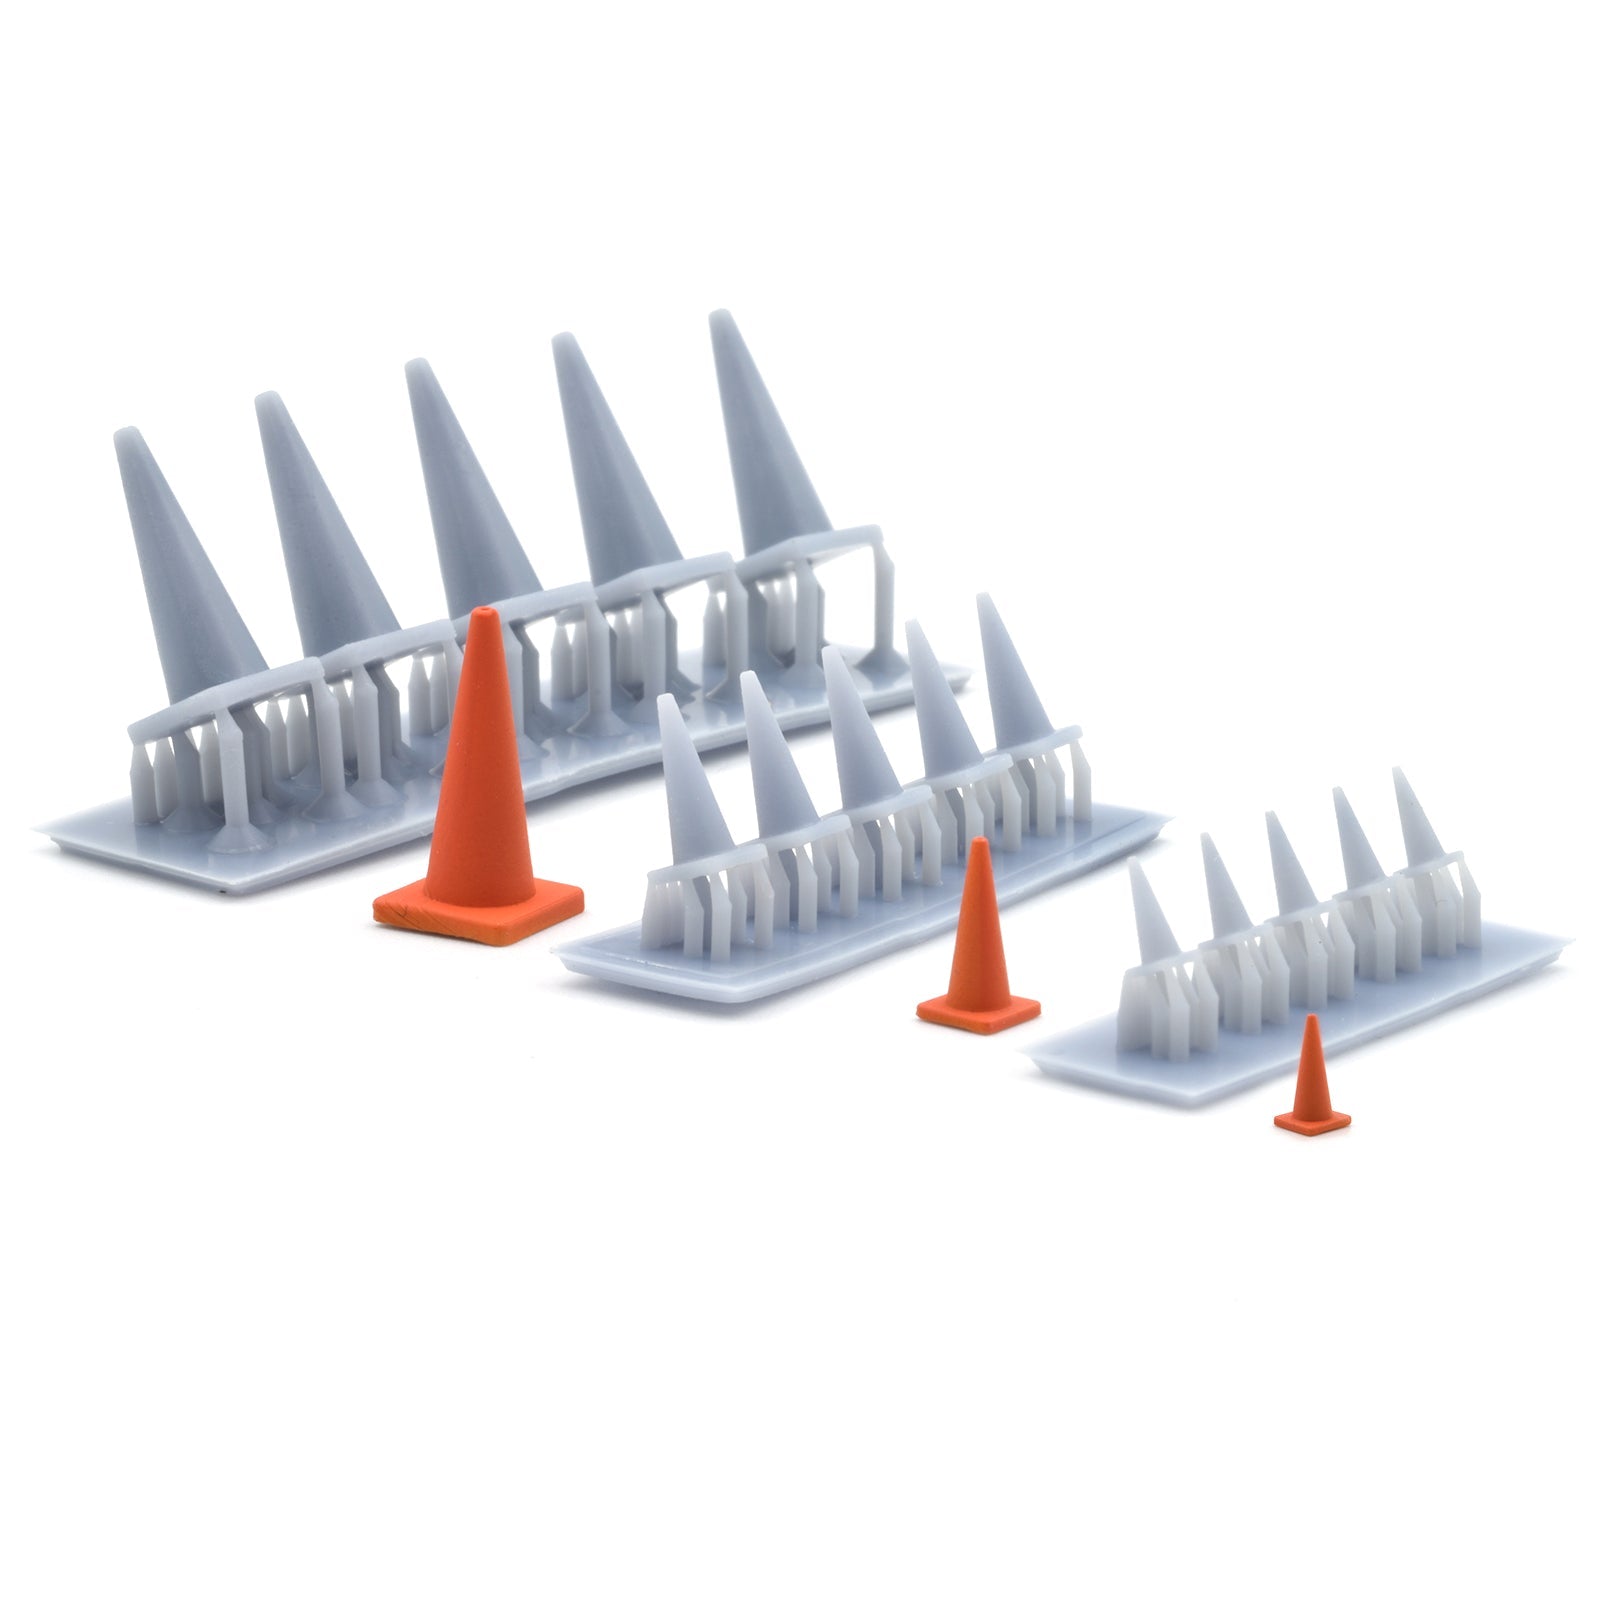 Traffic Cones, HO Scale, by Scientific, Package of 24 - Micro - Mark Laser Model Kits